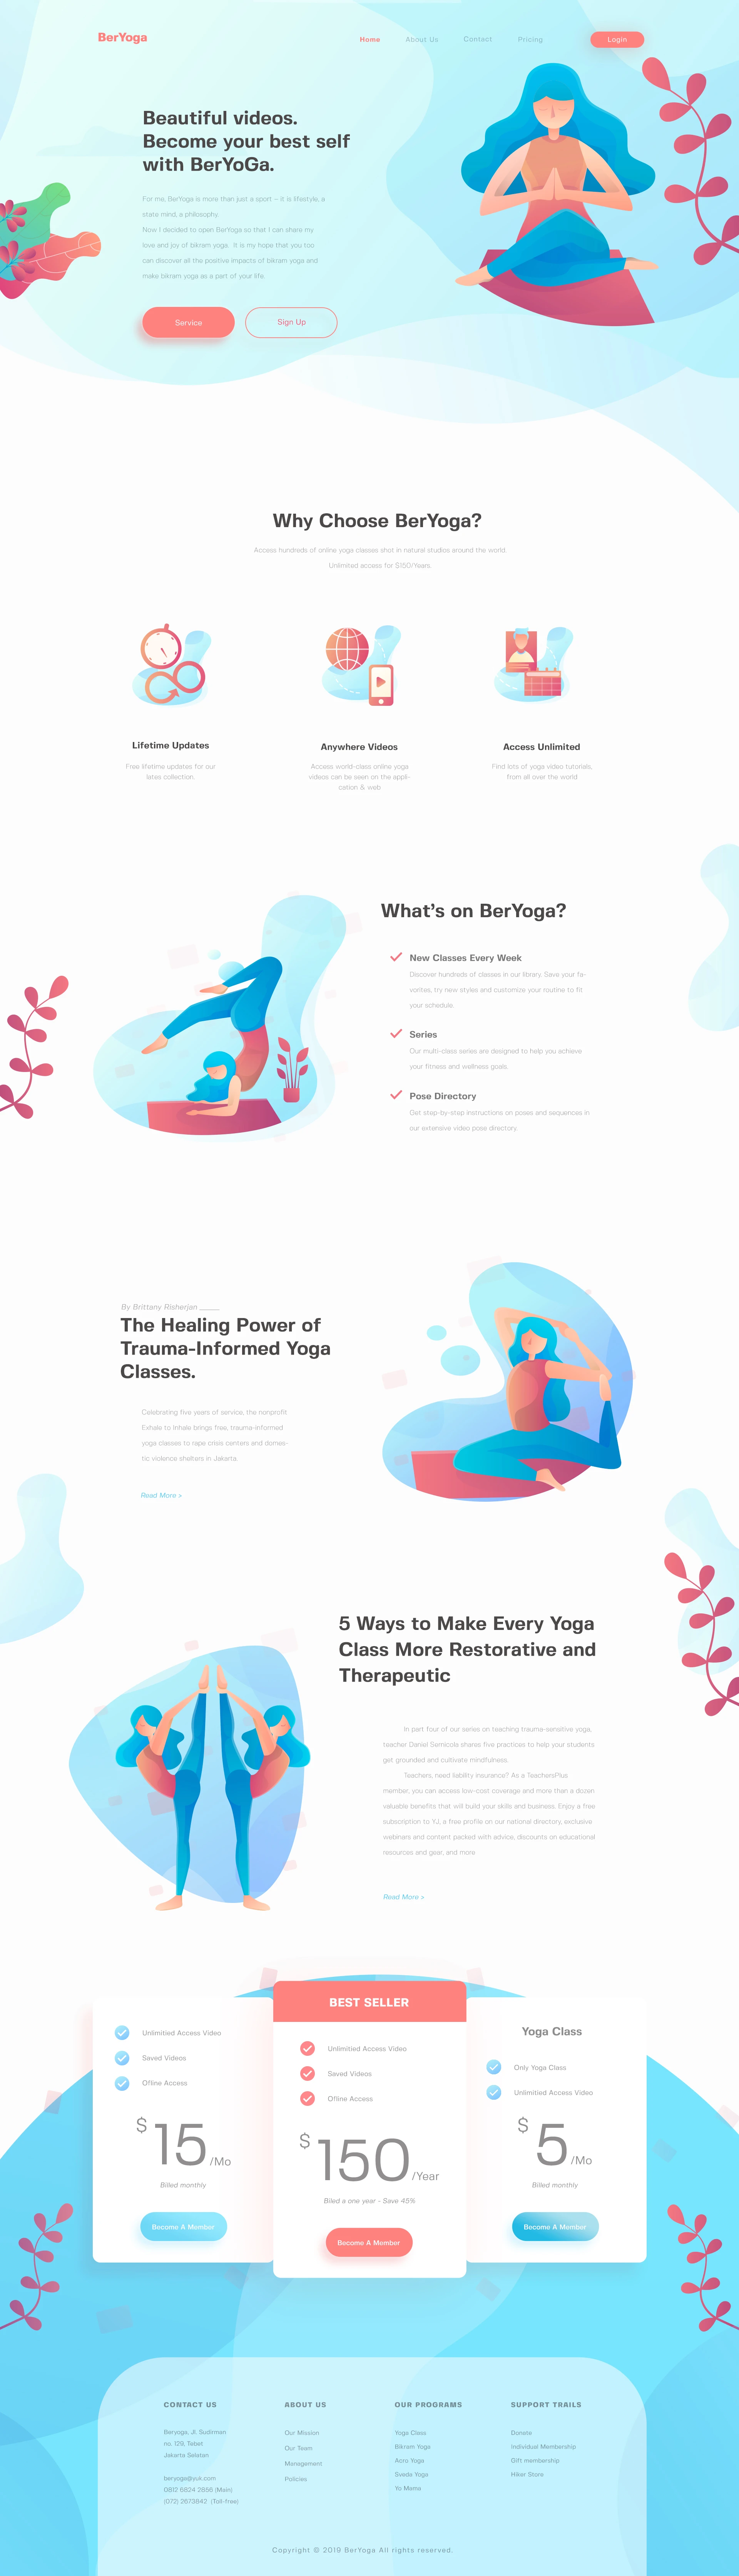 BerYoga - Yoga Landing Page - Elegant and clean landing page design with cool illustration.